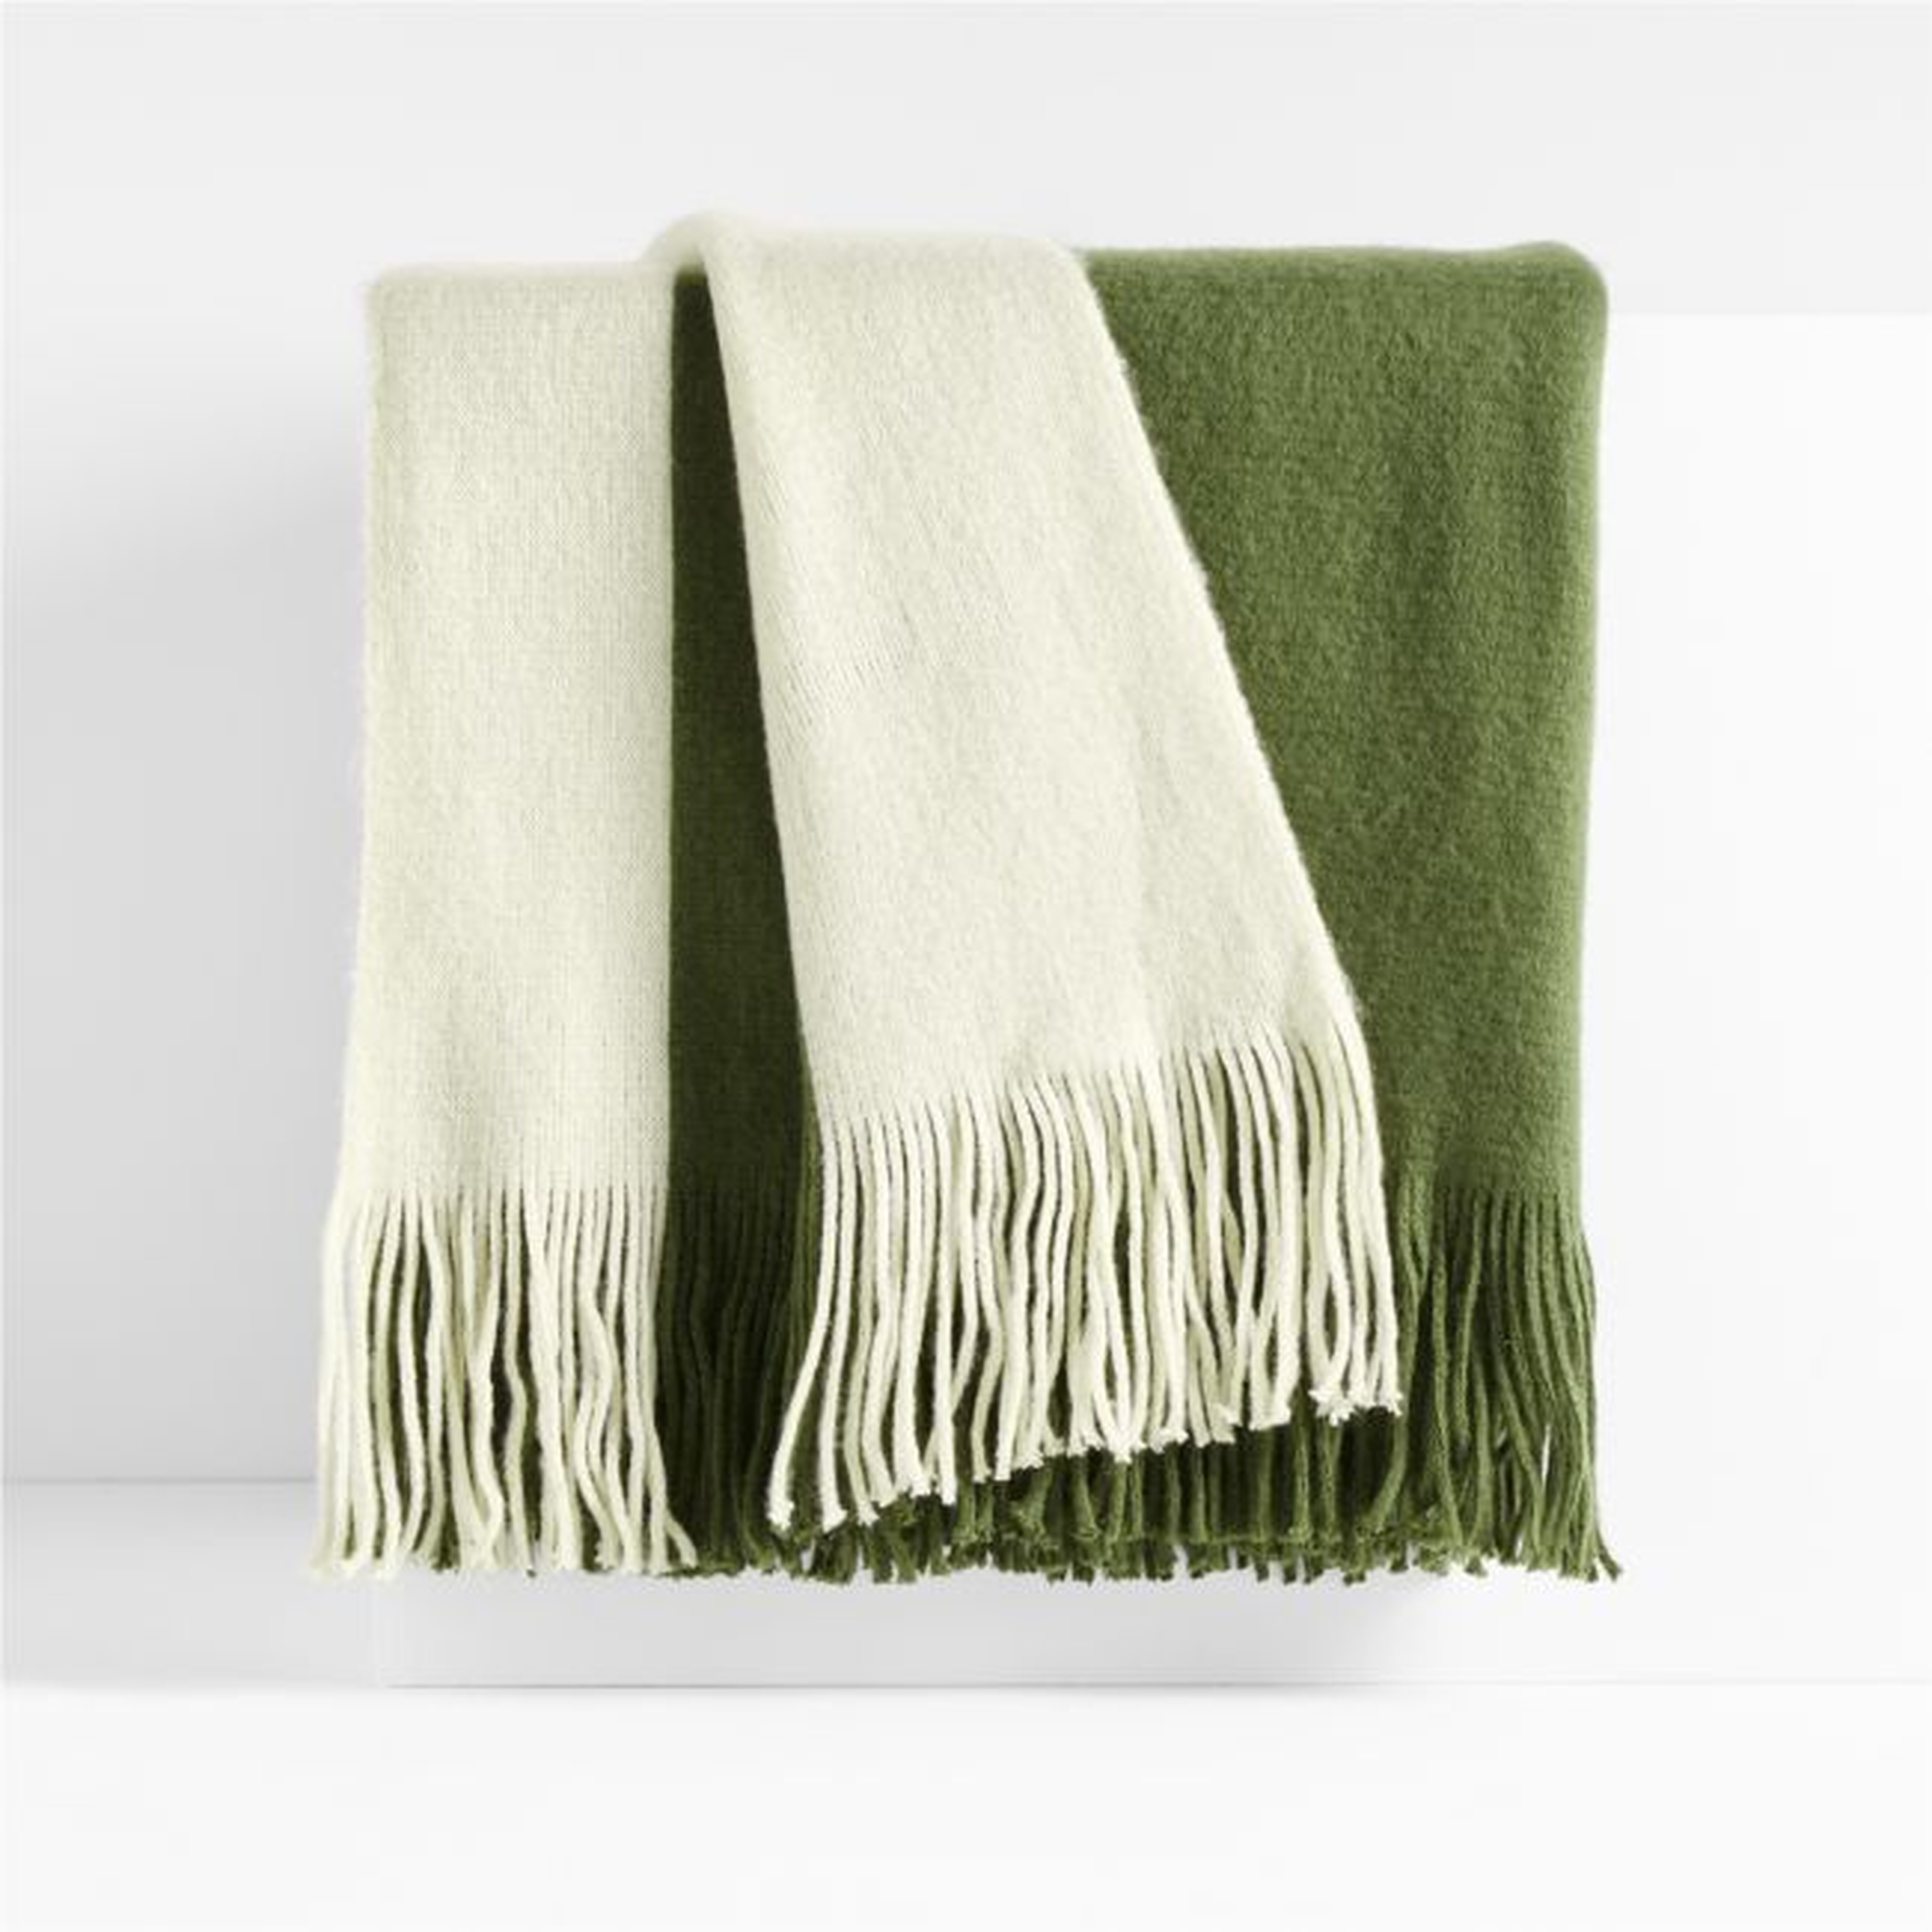 Tepi 70"x55" Moss Throw Blanket - Crate and Barrel